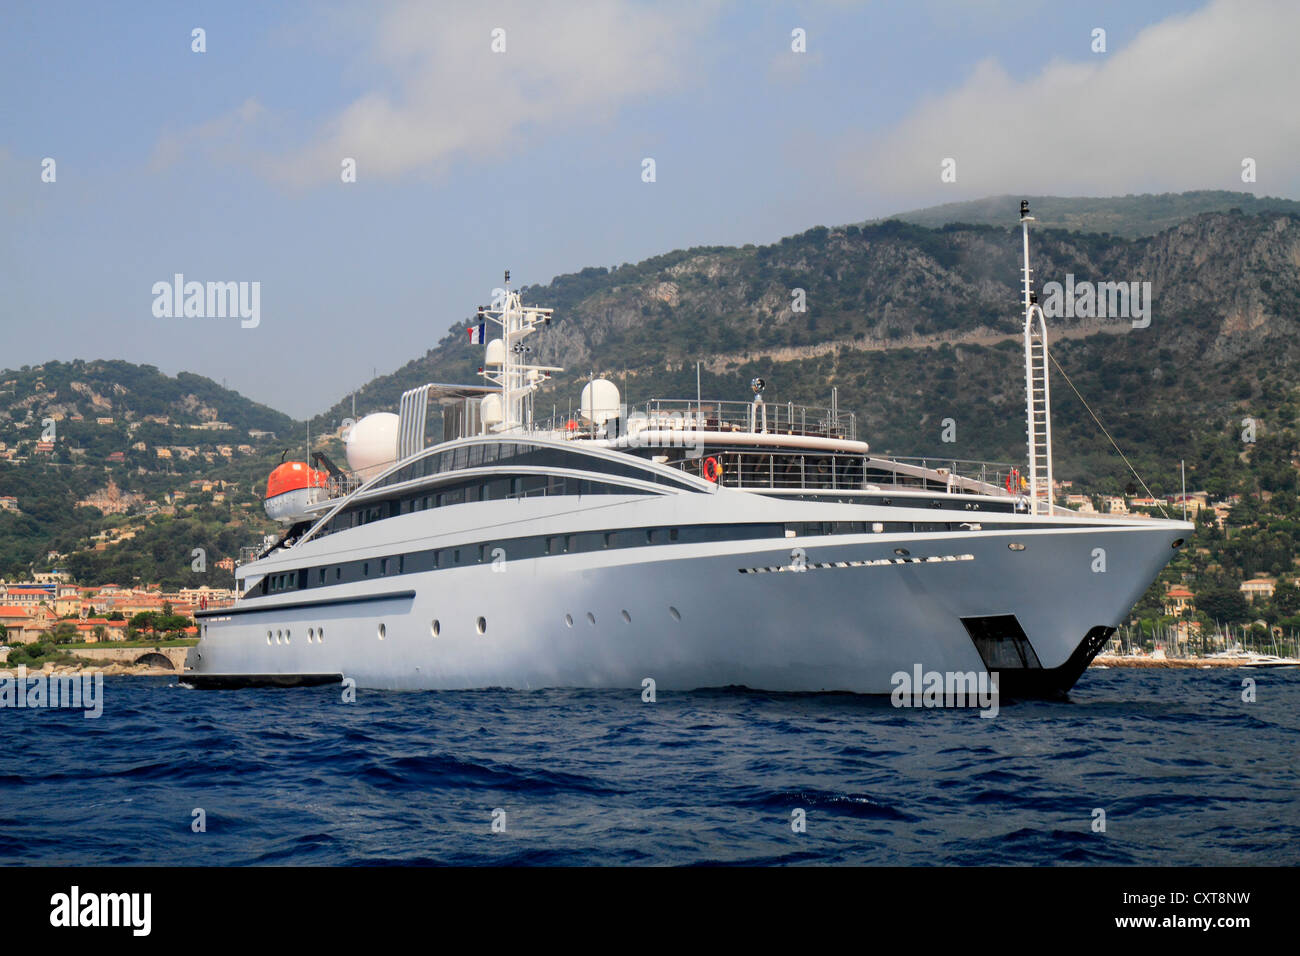 RM Elegant, a cruiser built by Kanellos Bros, Length: 72.48 meters, built in 2005, Cap Ferrat, French Riviera, France Stock Photo